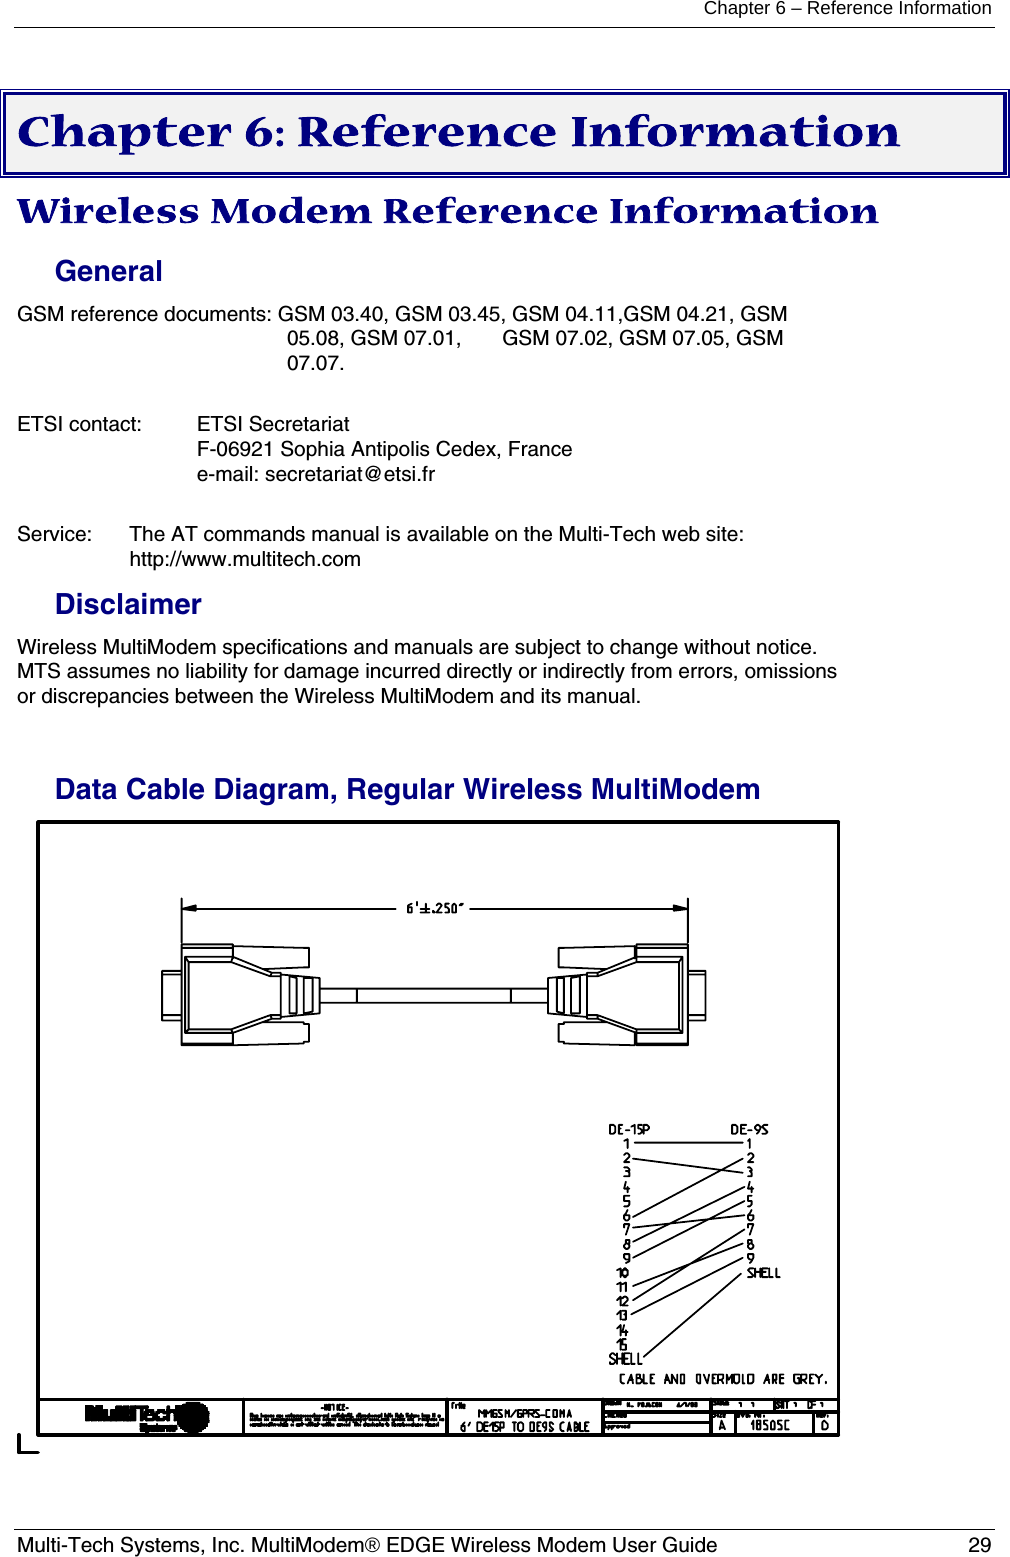 Chapter 6 – Reference Information  Multi-Tech Systems, Inc. MultiModem® EDGE Wireless Modem User Guide  29  Chapter 6: Reference Information Wireless Modem Reference Information General GSM reference documents: GSM 03.40, GSM 03.45, GSM 04.11,GSM 04.21, GSM 05.08, GSM 07.01,       GSM 07.02, GSM 07.05, GSM 07.07.  ETSI contact:   ETSI Secretariat F-06921 Sophia Antipolis Cedex, France e-mail: secretariat@etsi.fr  Service:   The AT commands manual is available on the Multi-Tech web site:   http://www.multitech.com Disclaimer Wireless MultiModem specifications and manuals are subject to change without notice.  MTS assumes no liability for damage incurred directly or indirectly from errors, omissions or discrepancies between the Wireless MultiModem and its manual.  Data Cable Diagram, Regular Wireless MultiModem   